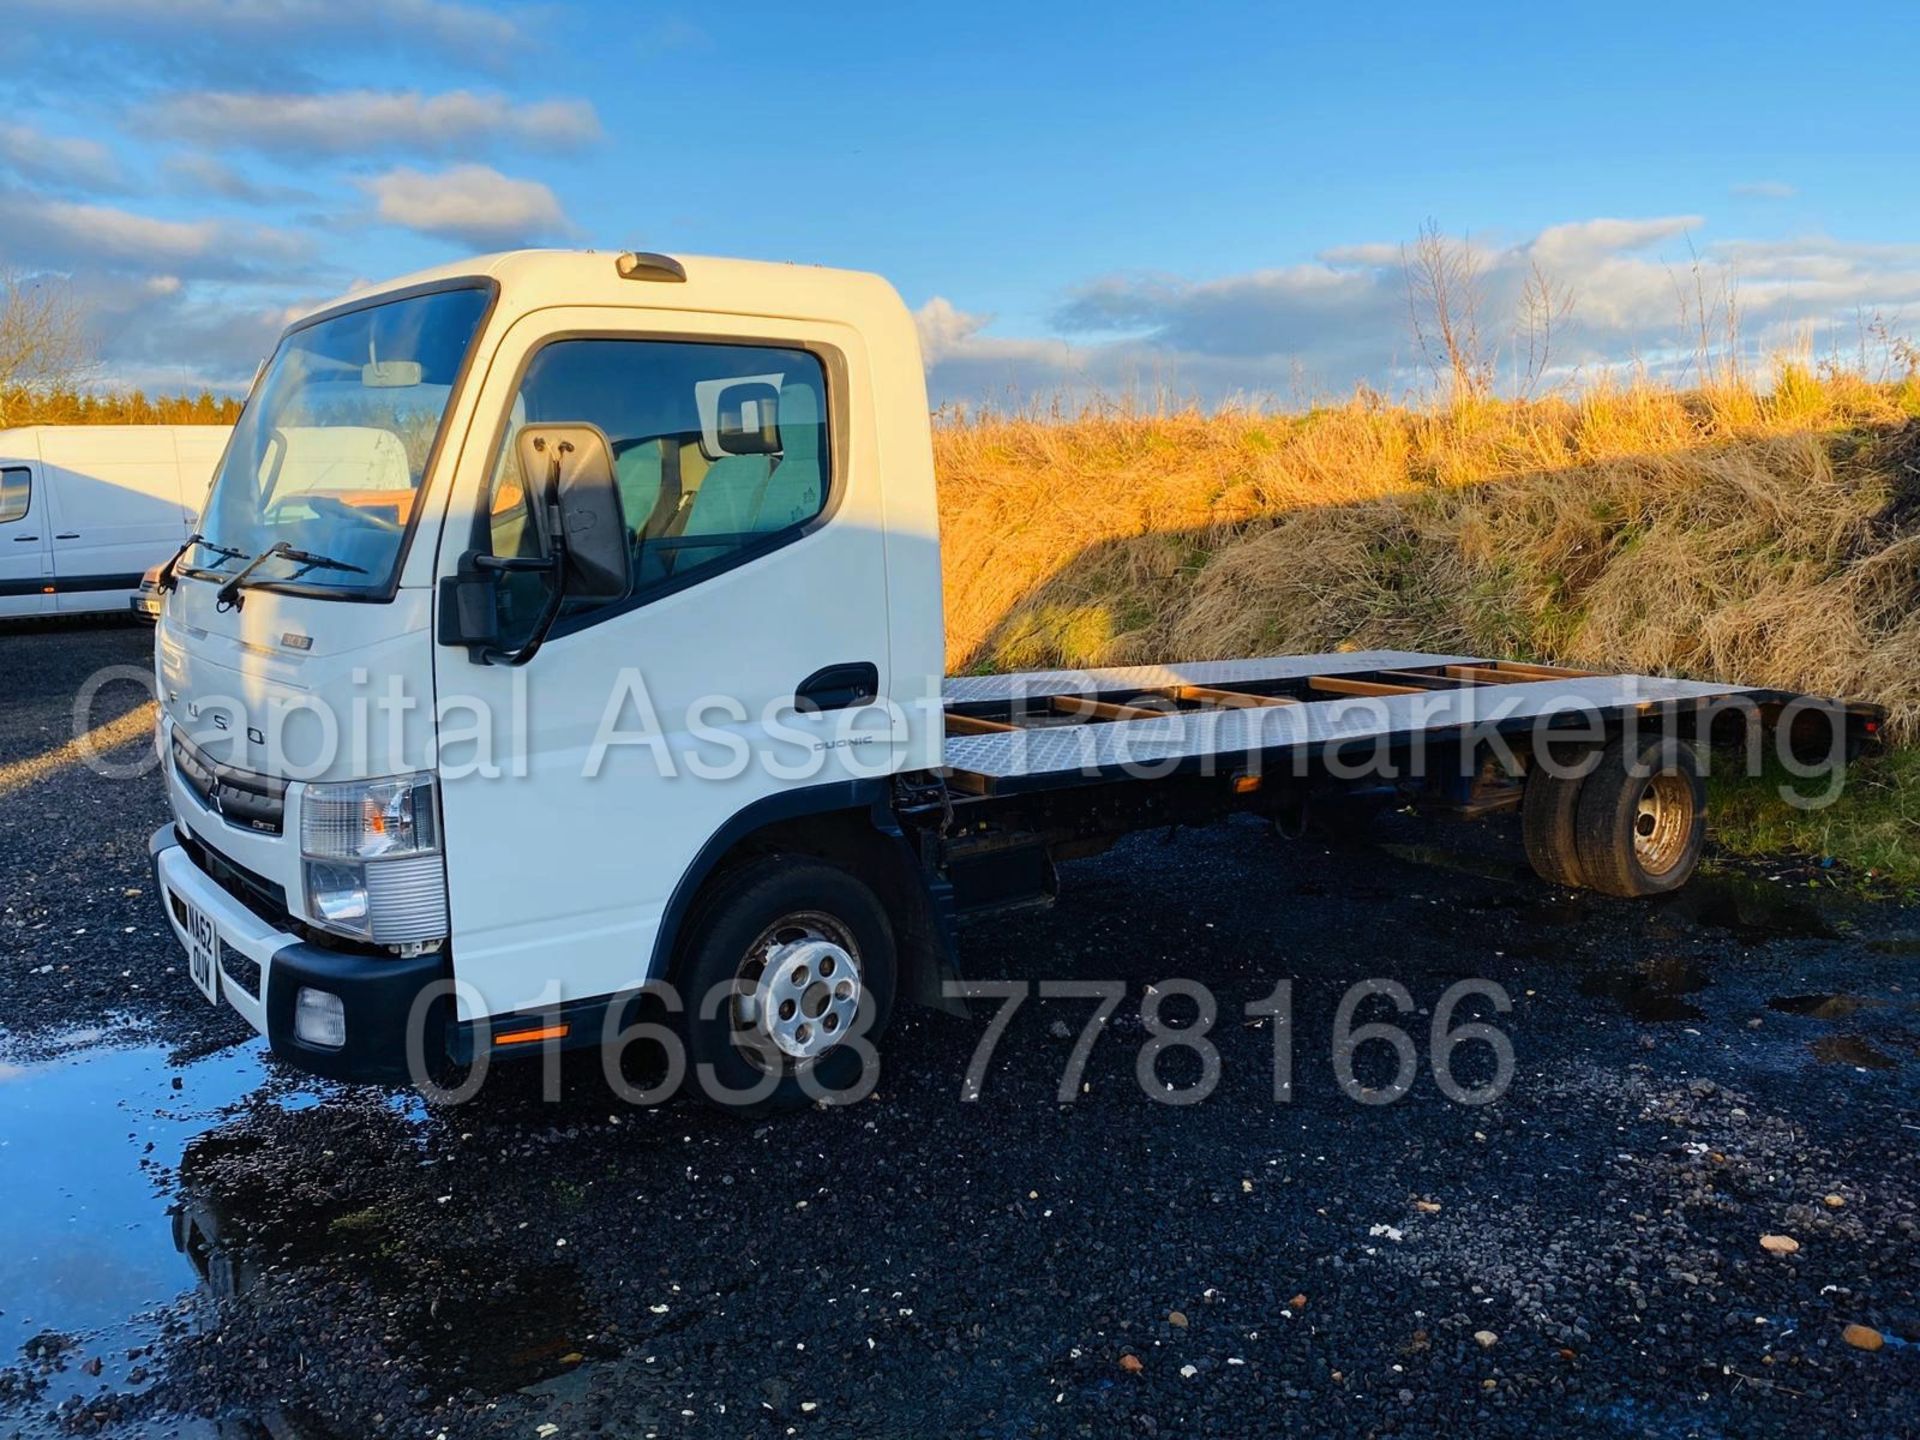 MITSUBISHI FUSO CANTER 3C13 38 *LWB - RECOVERY TRUCK* (2013) '3.0 DIESEL - 130 BHP - AUTOMATIC' - Image 5 of 23